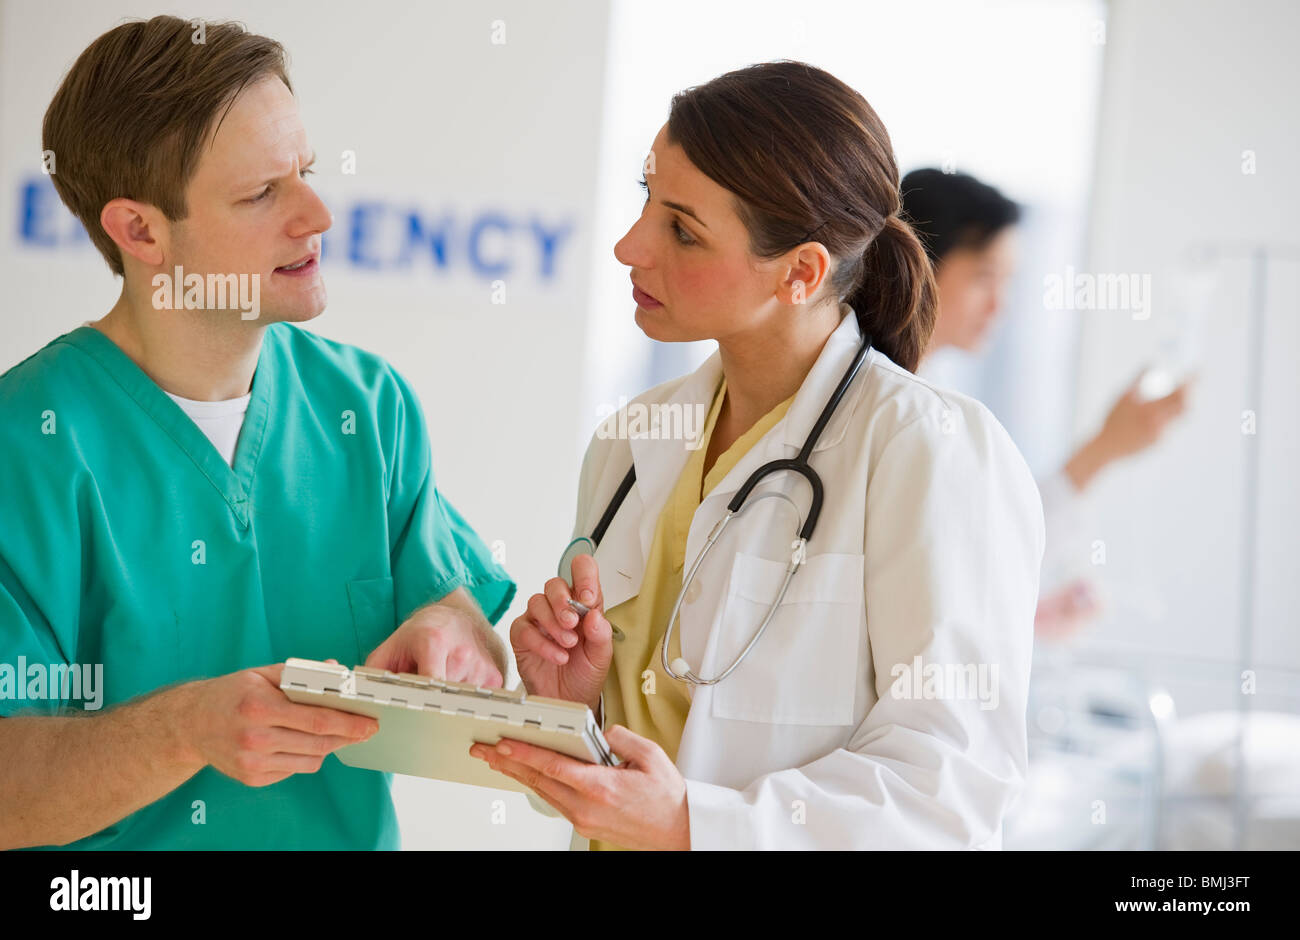 Healthcare workers talking Stock Photo